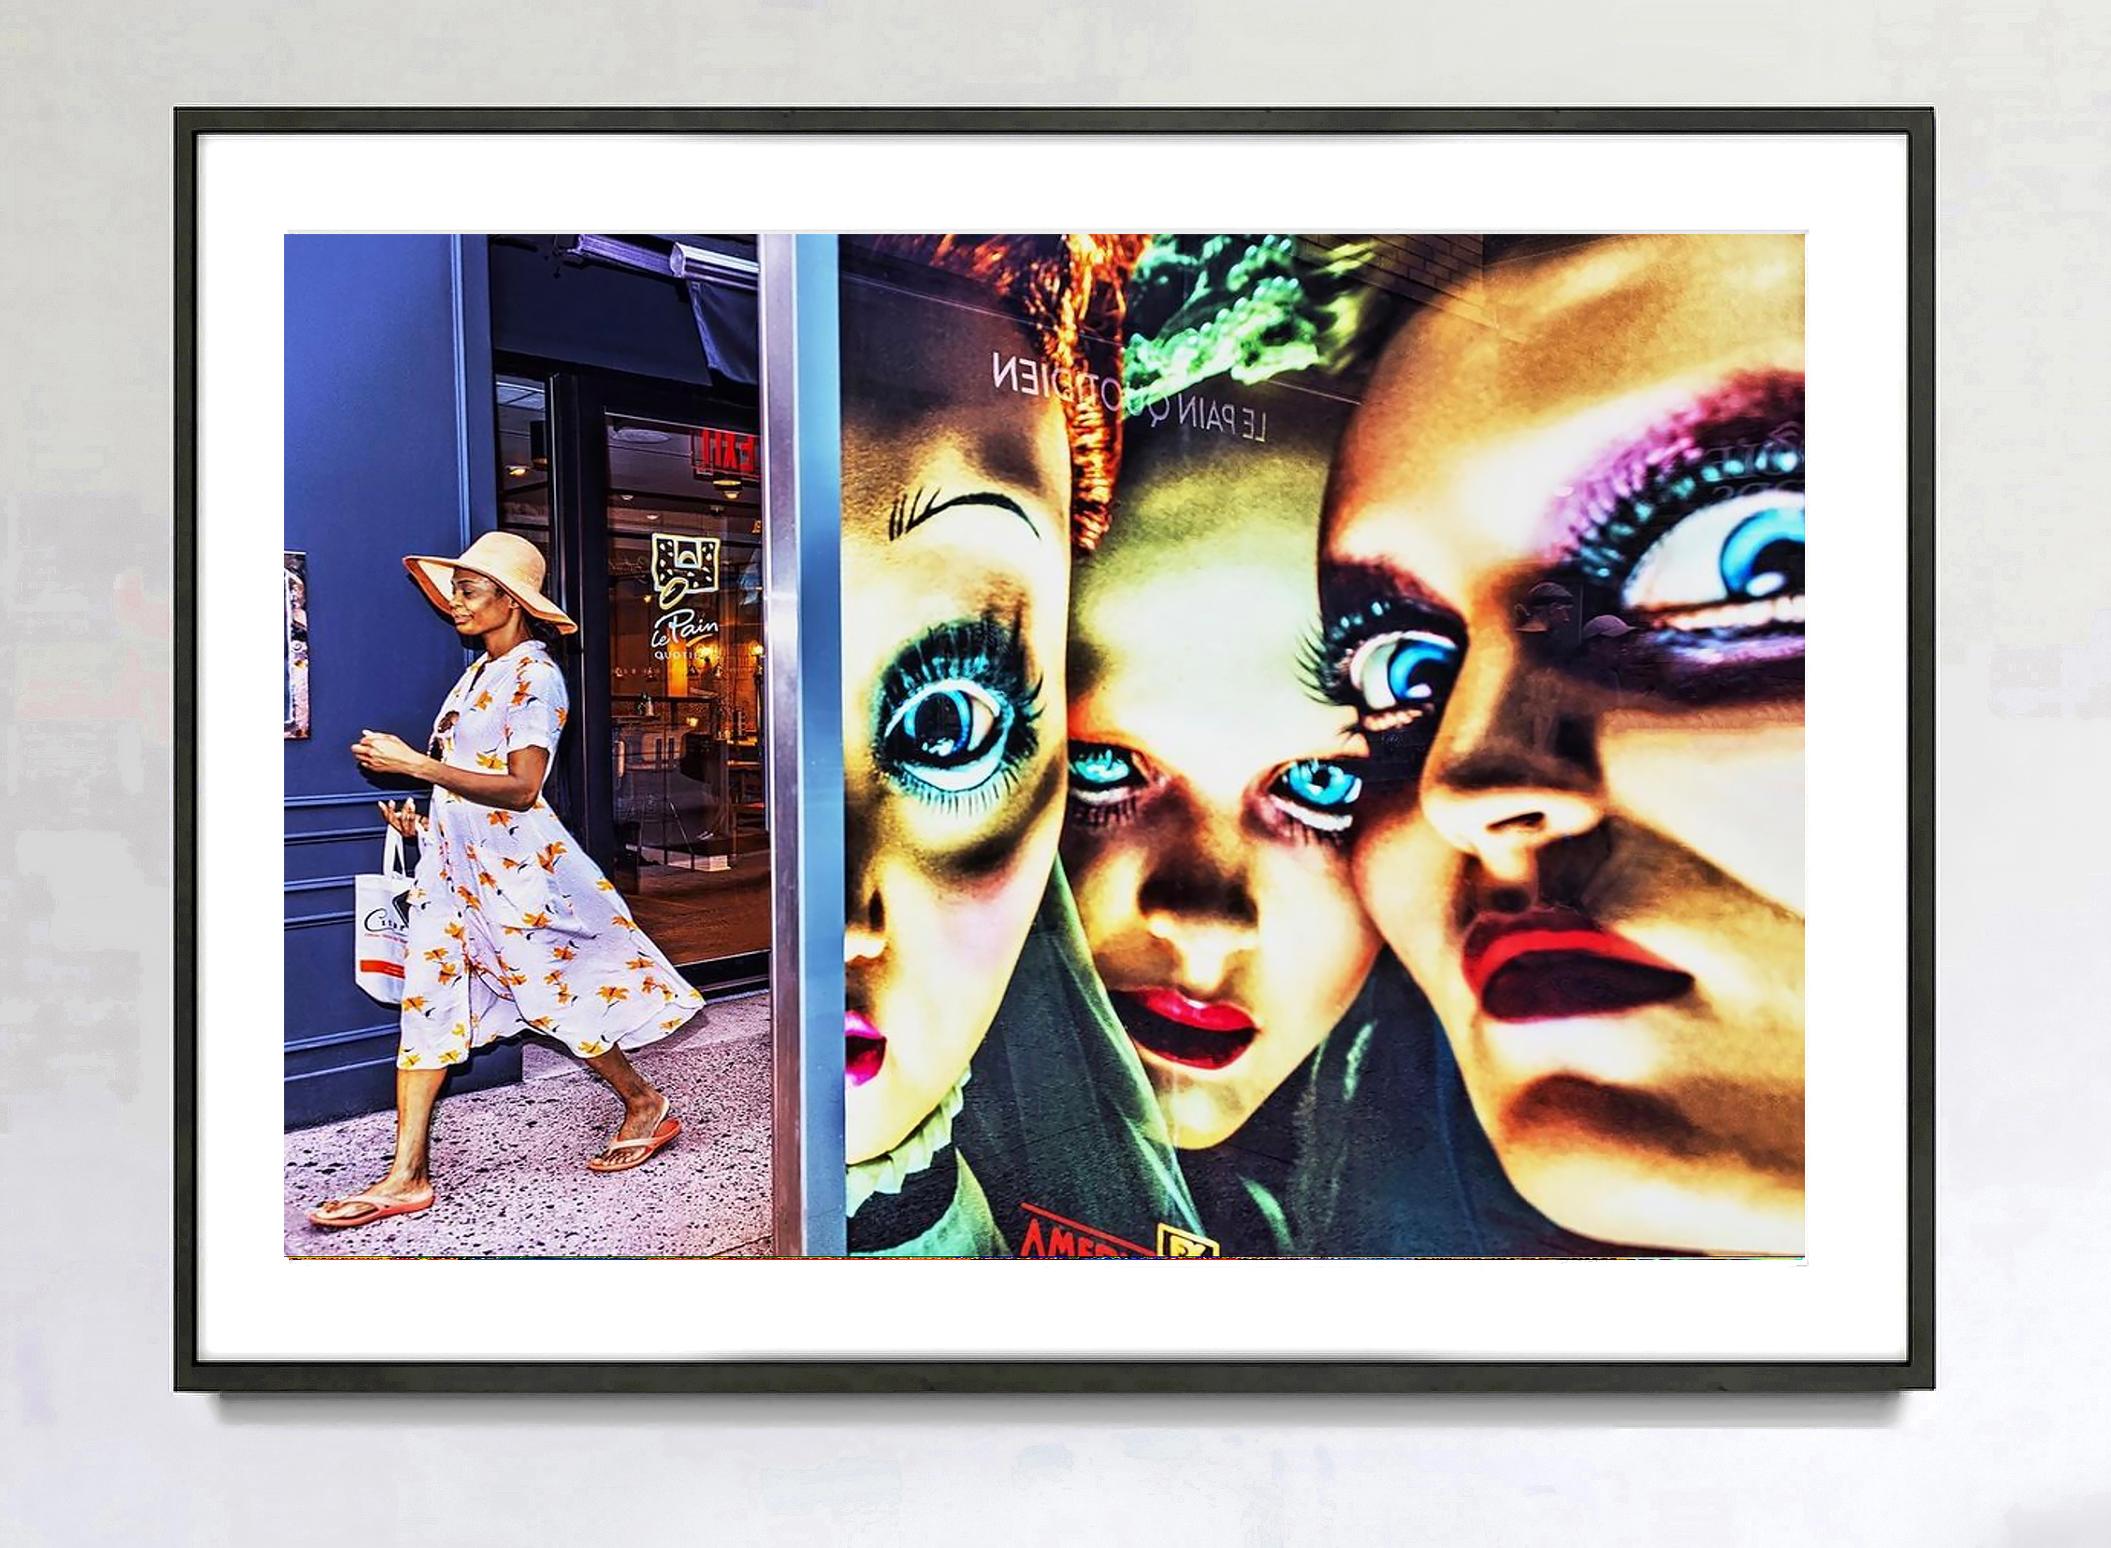 A photograph of a photograph can be as real as reality.  Illusion and reality on the streets of New York are on display in this double-take street photograph by Mitchell Funk.  The fine art print is signed, dated, and numbered 2/15, lower right